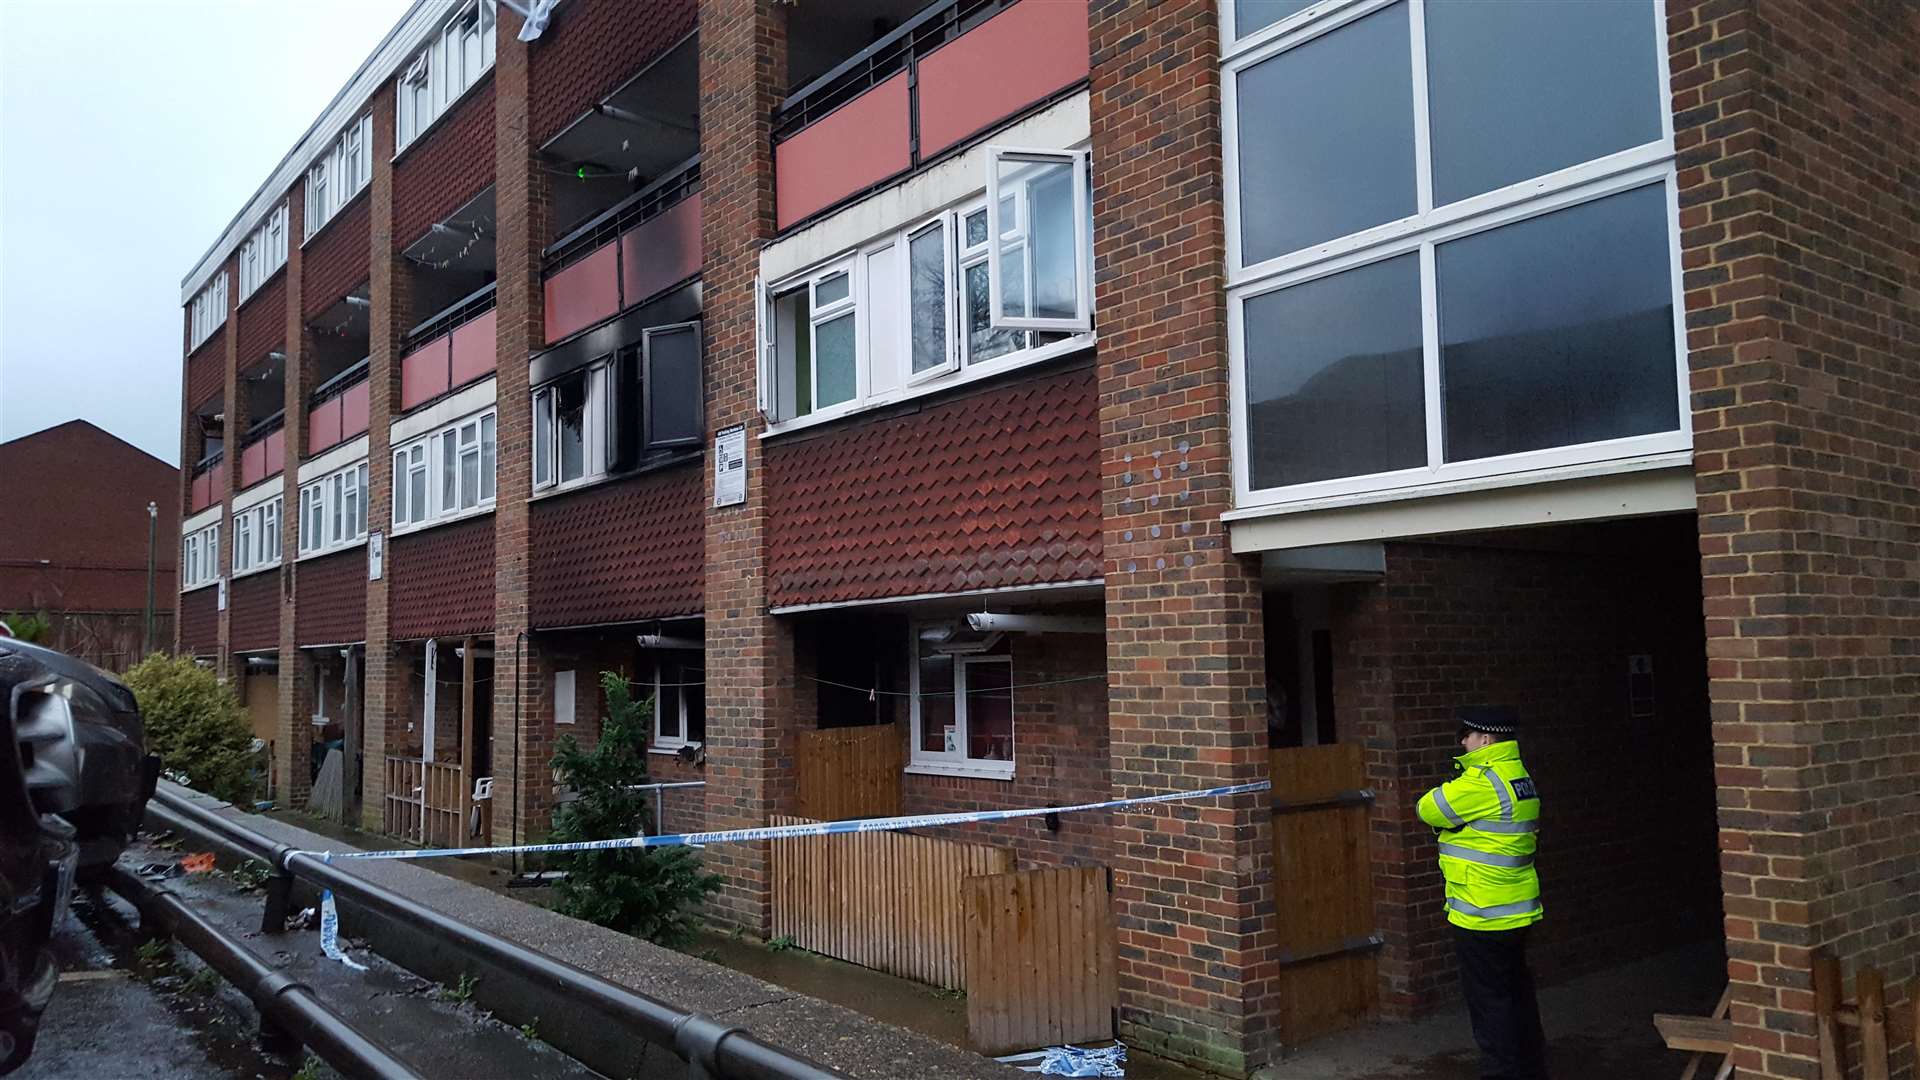 Police cordoned off the block yesterday to begin investigations into the cause of the fire